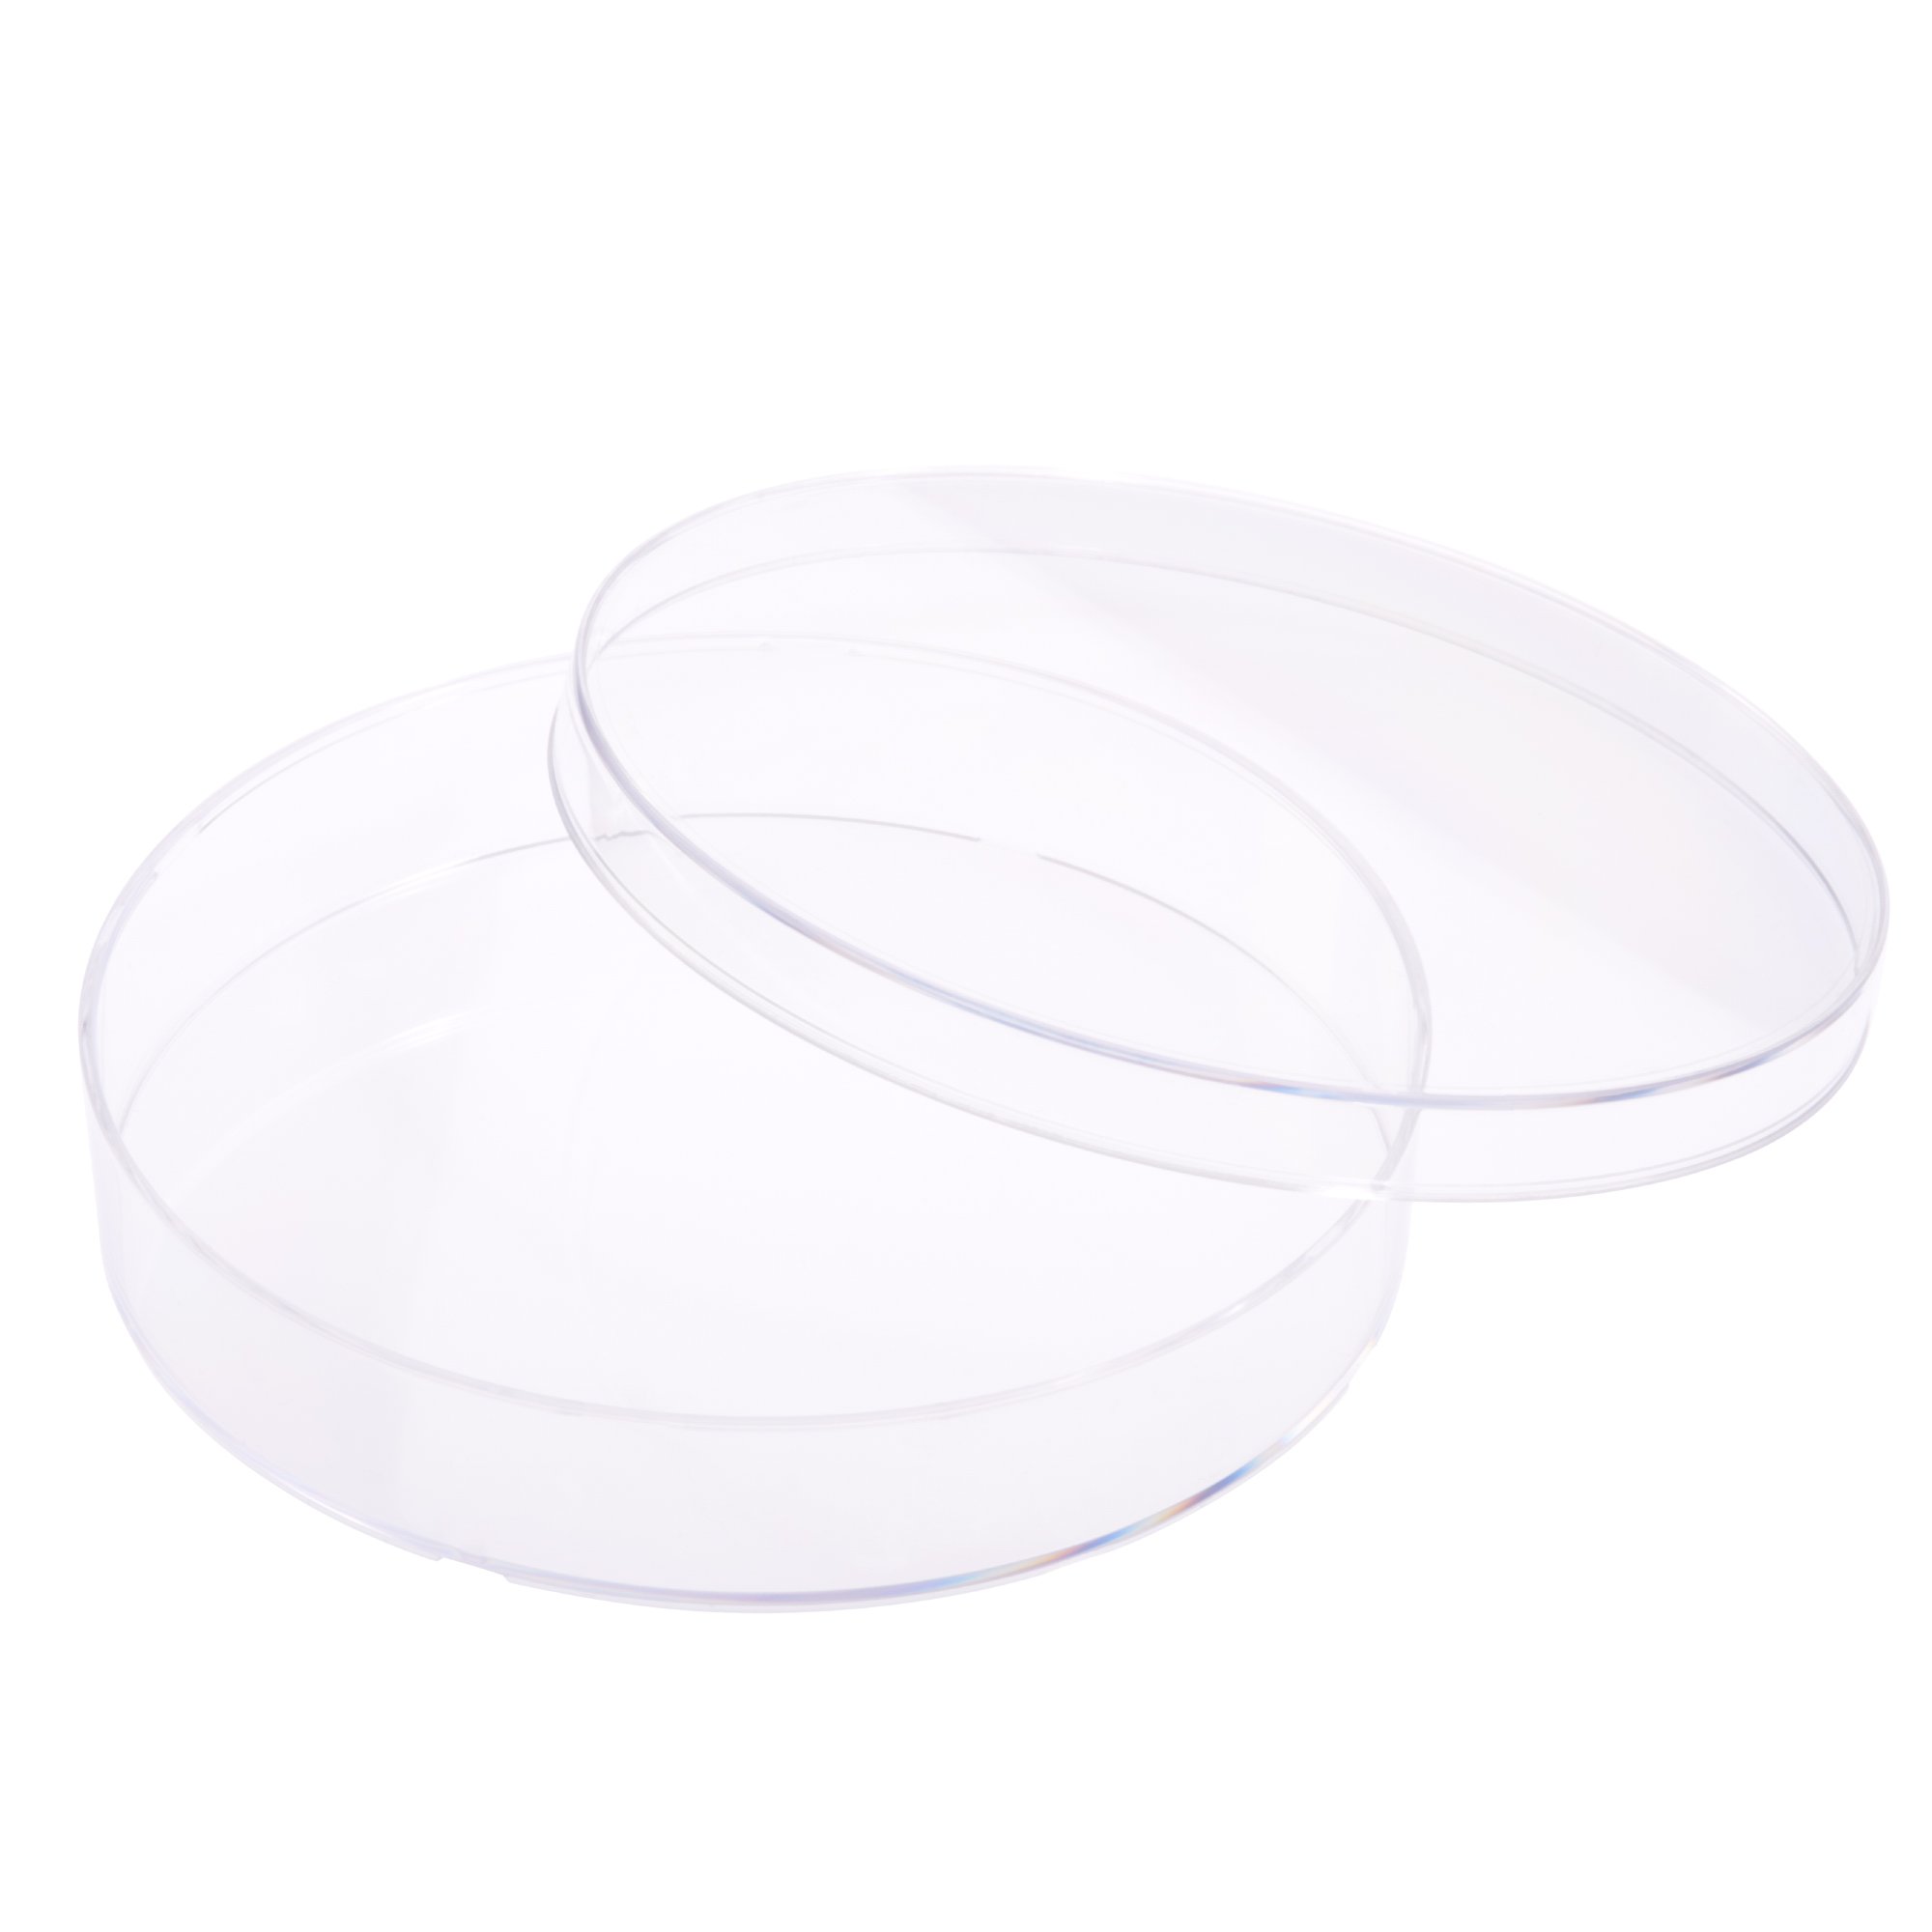 Celltreat 229652 150mm x 25mm Tissue Culture Treated Dish, Sterile